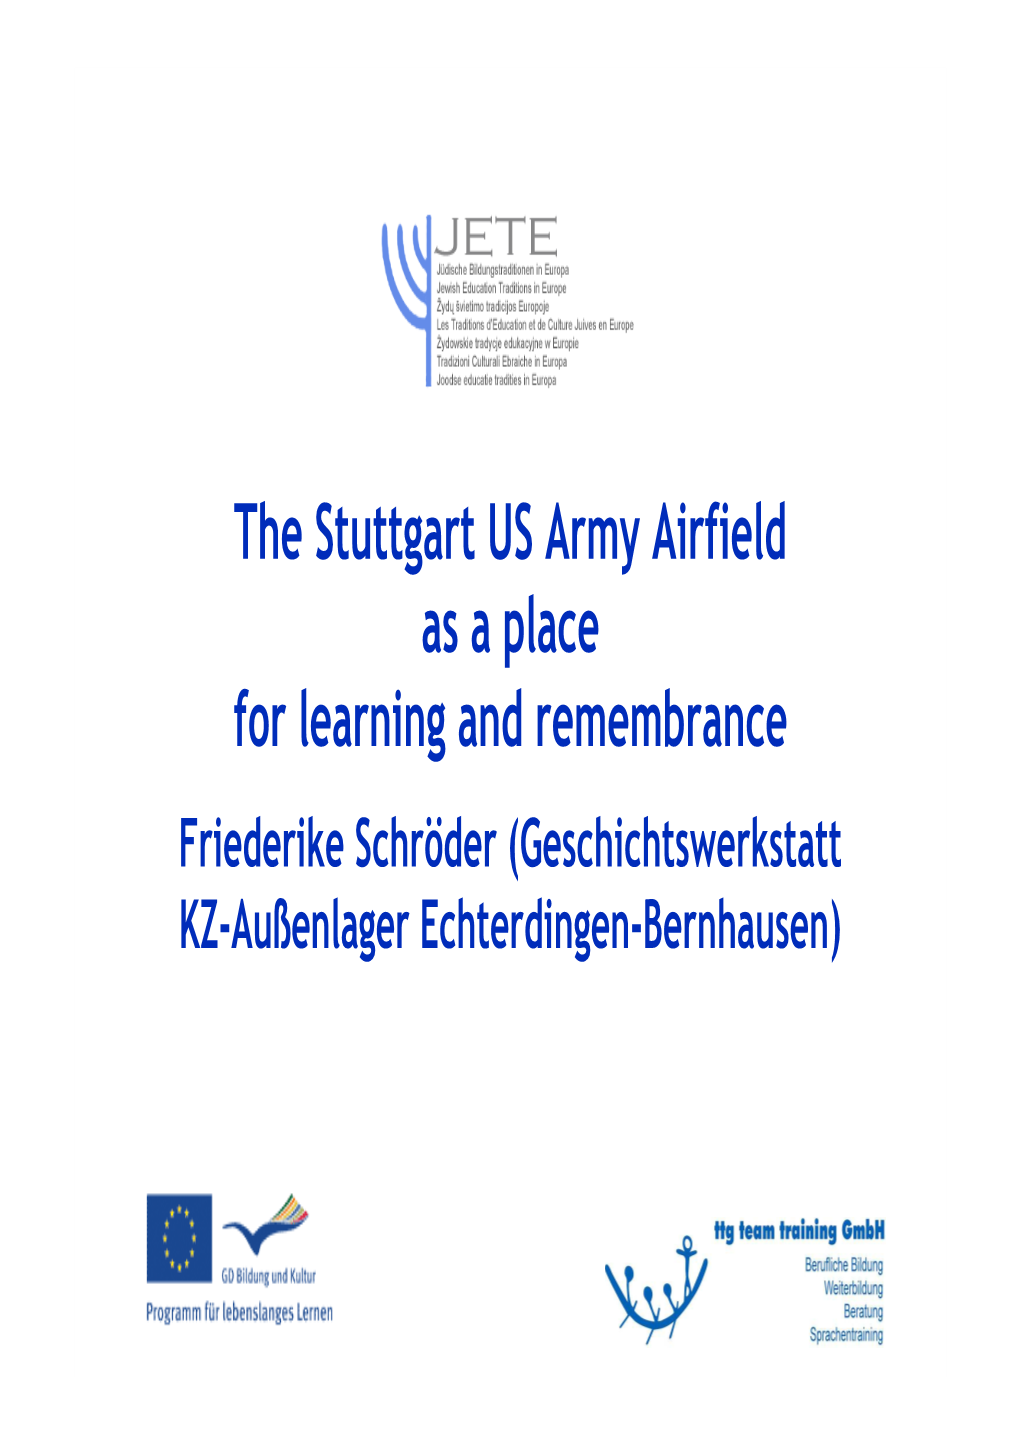 The Stuttgart US Army Airfield As a Place for Learning and Remembrance